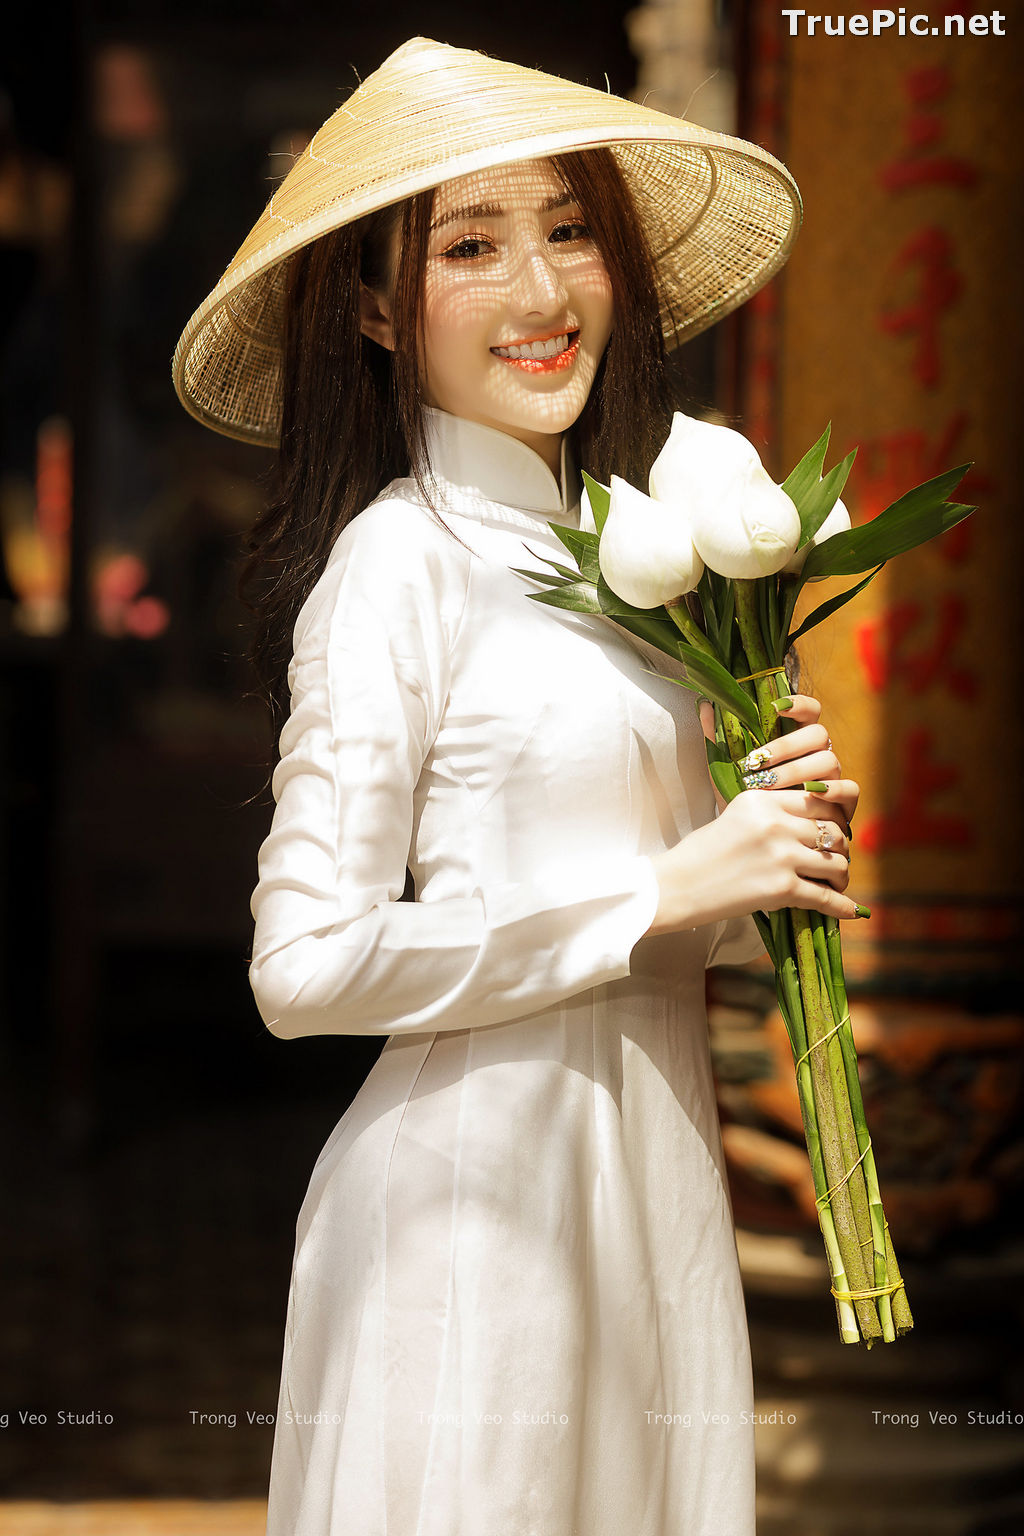 Image The Beauty of Vietnamese Girls with Traditional Dress (Ao Dai) #2 - TruePic.net - Picture-34